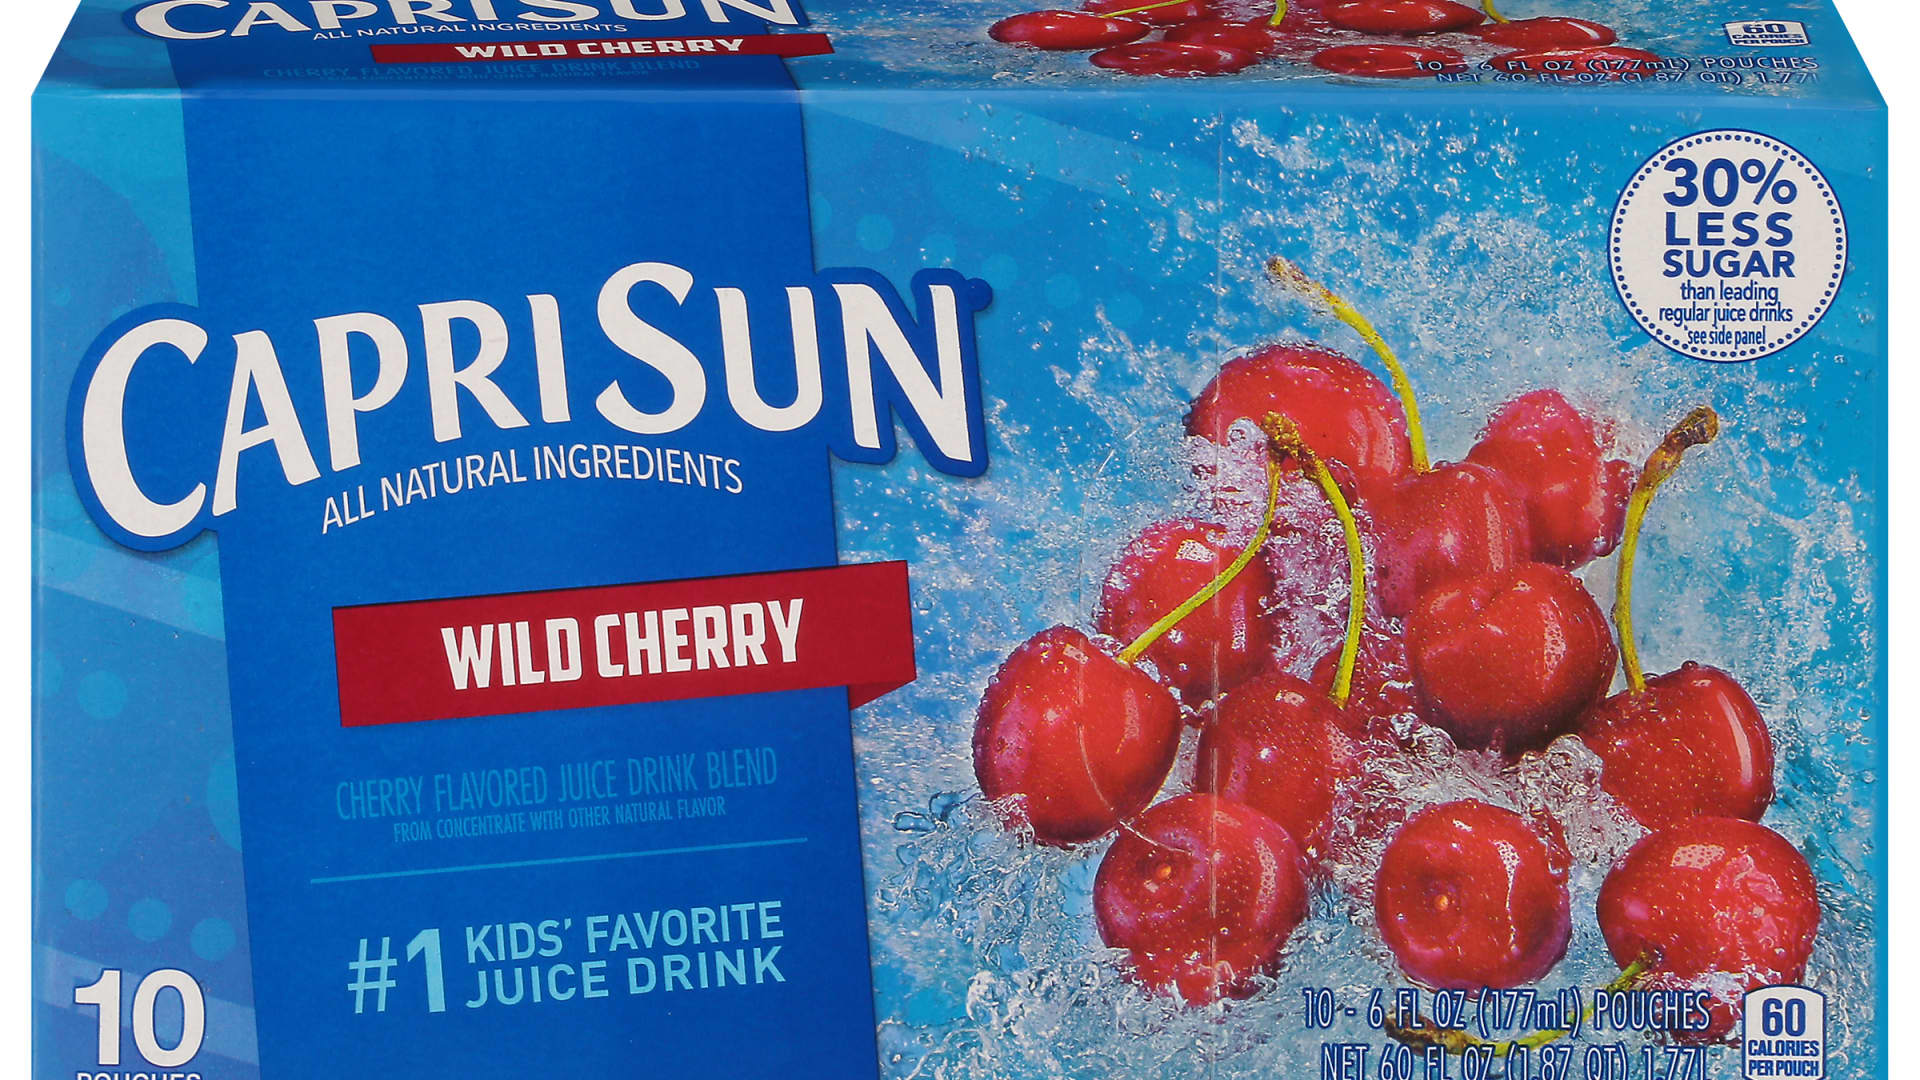 Thousands of pouches of Capri Sun are recalled due to possible contamination with cleaning solution